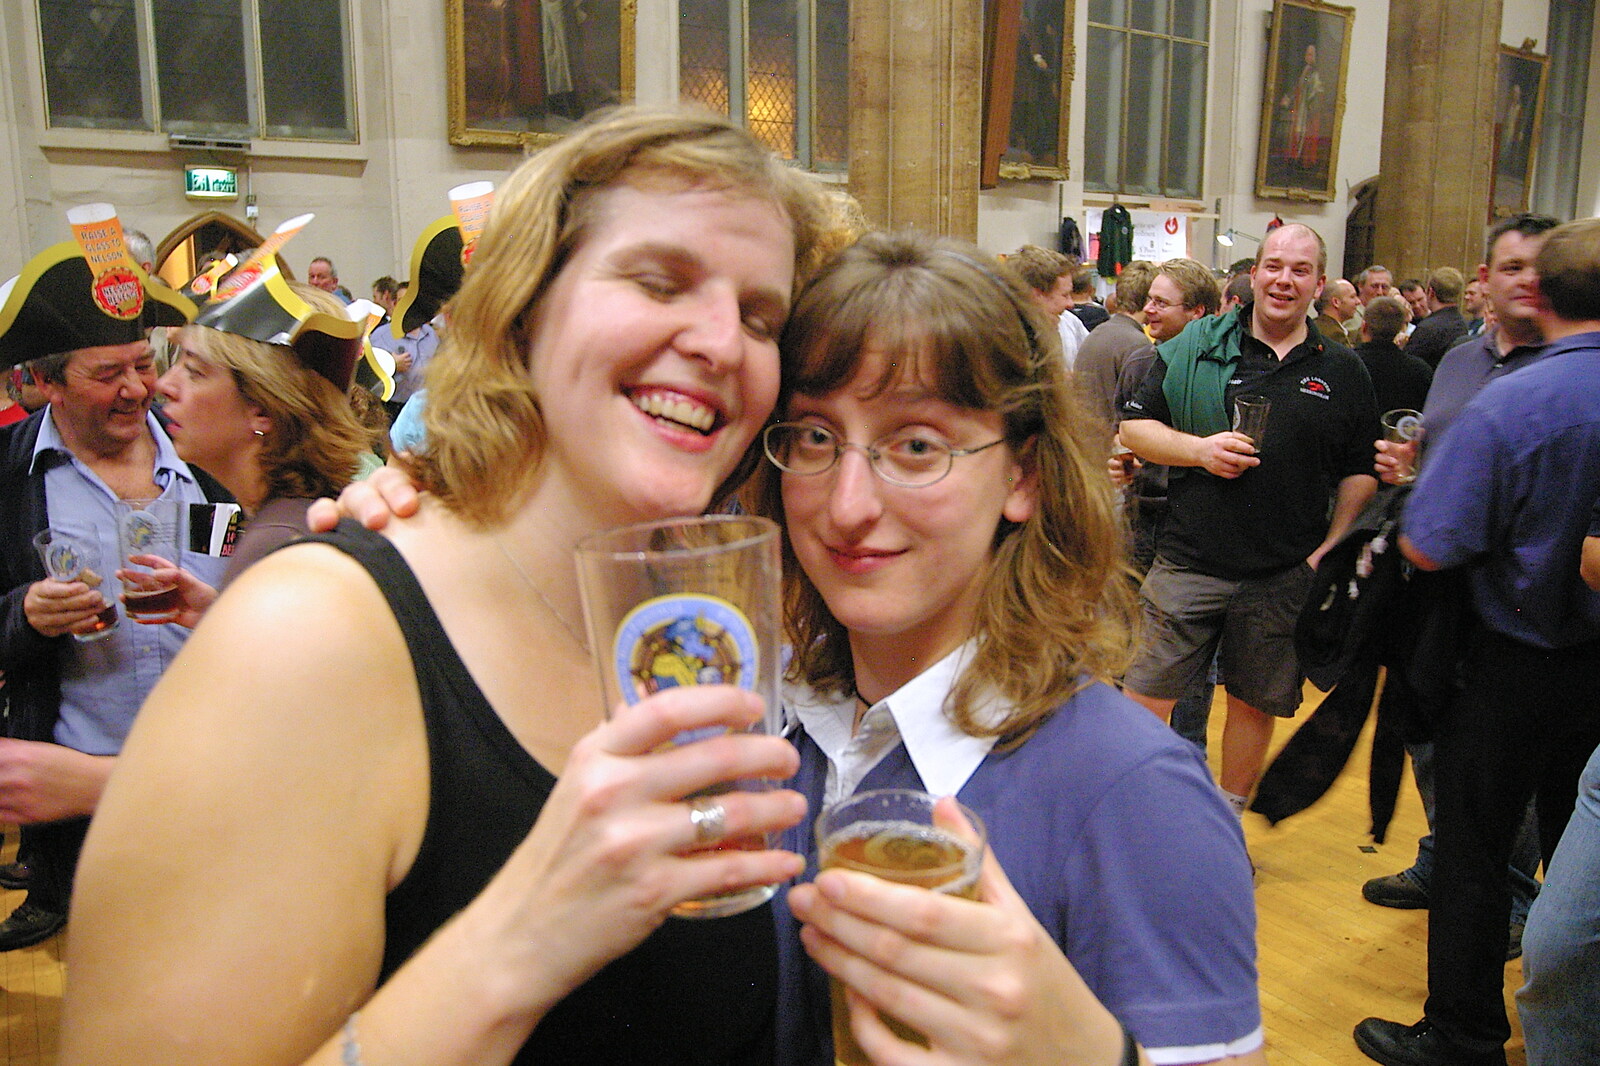 The 28th Norwich Beer Festival, St. Andrew's Hall, Norwich - 26th October 2005: Sazzle and Suey